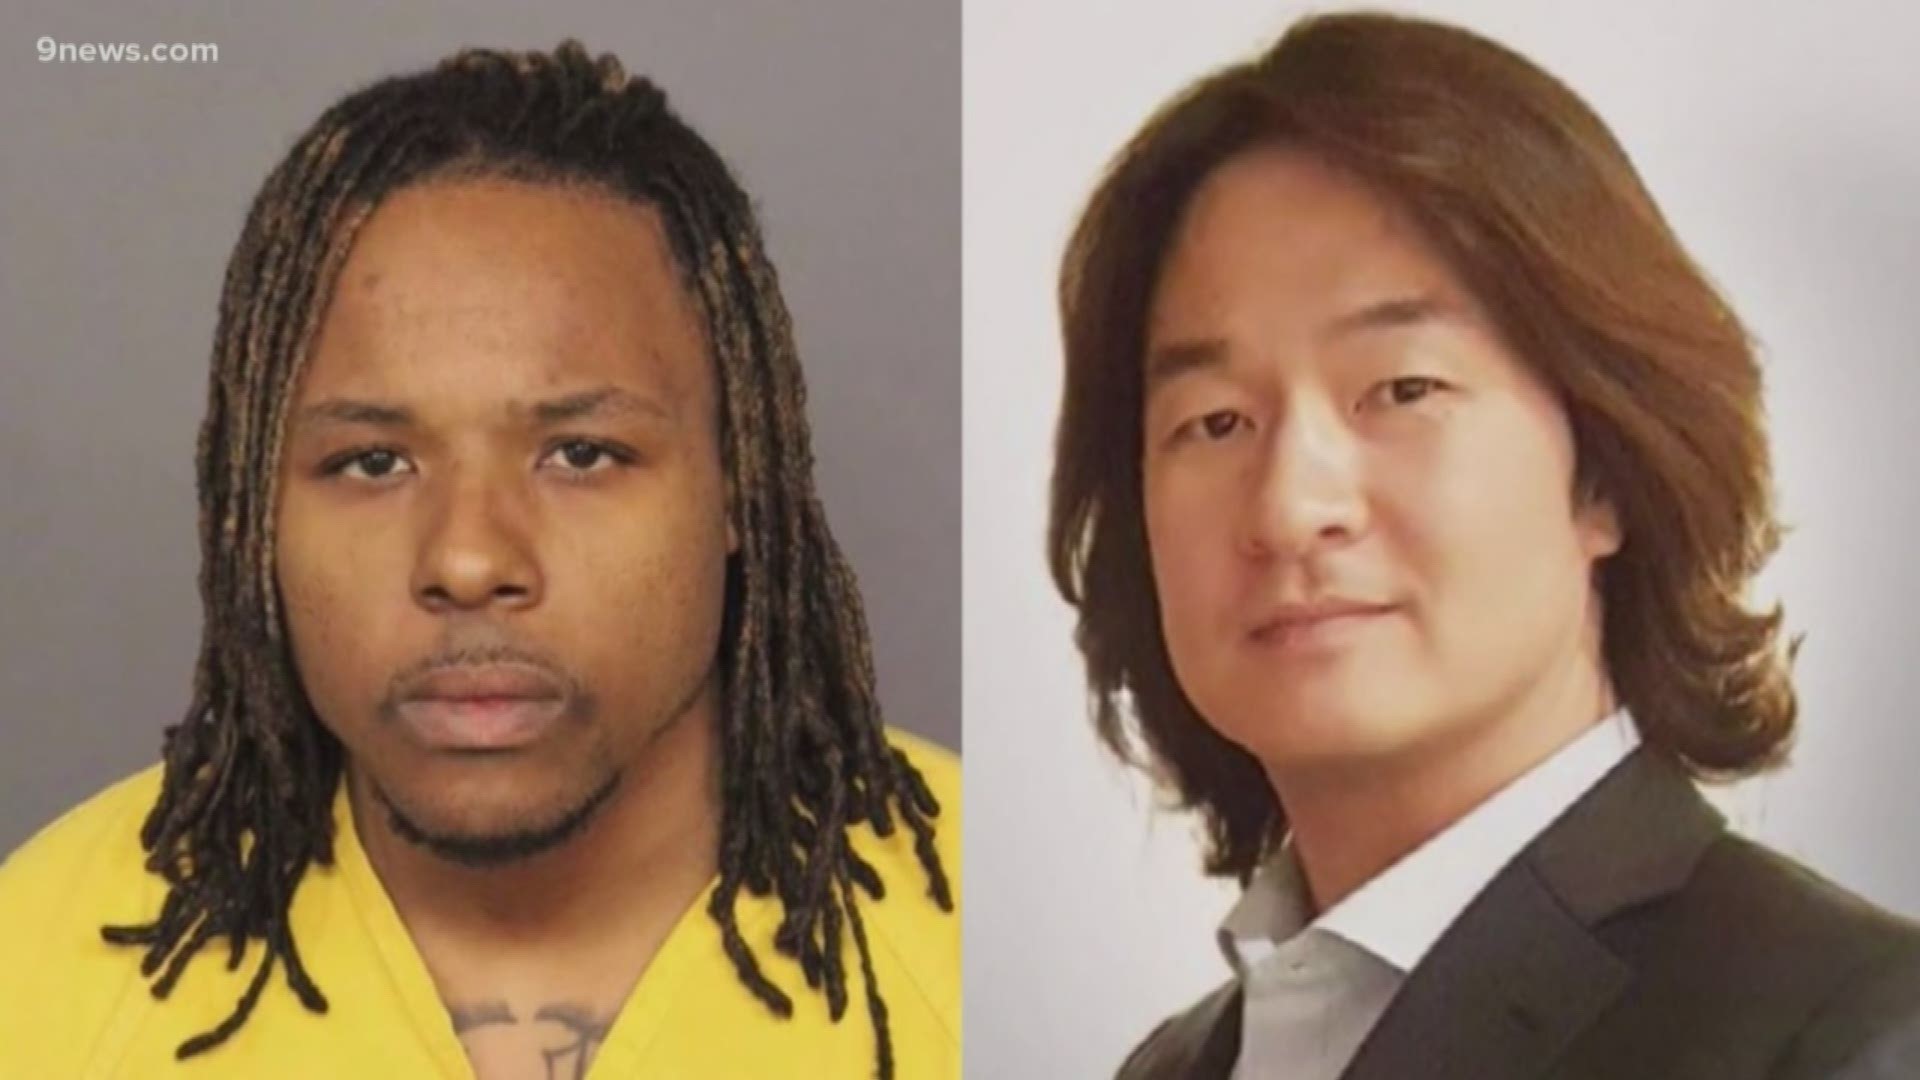 Michael Hancock is charged with first-degree murder in connection with the shooting death of Hyun Kim last year on Interstate 25 in Denver.